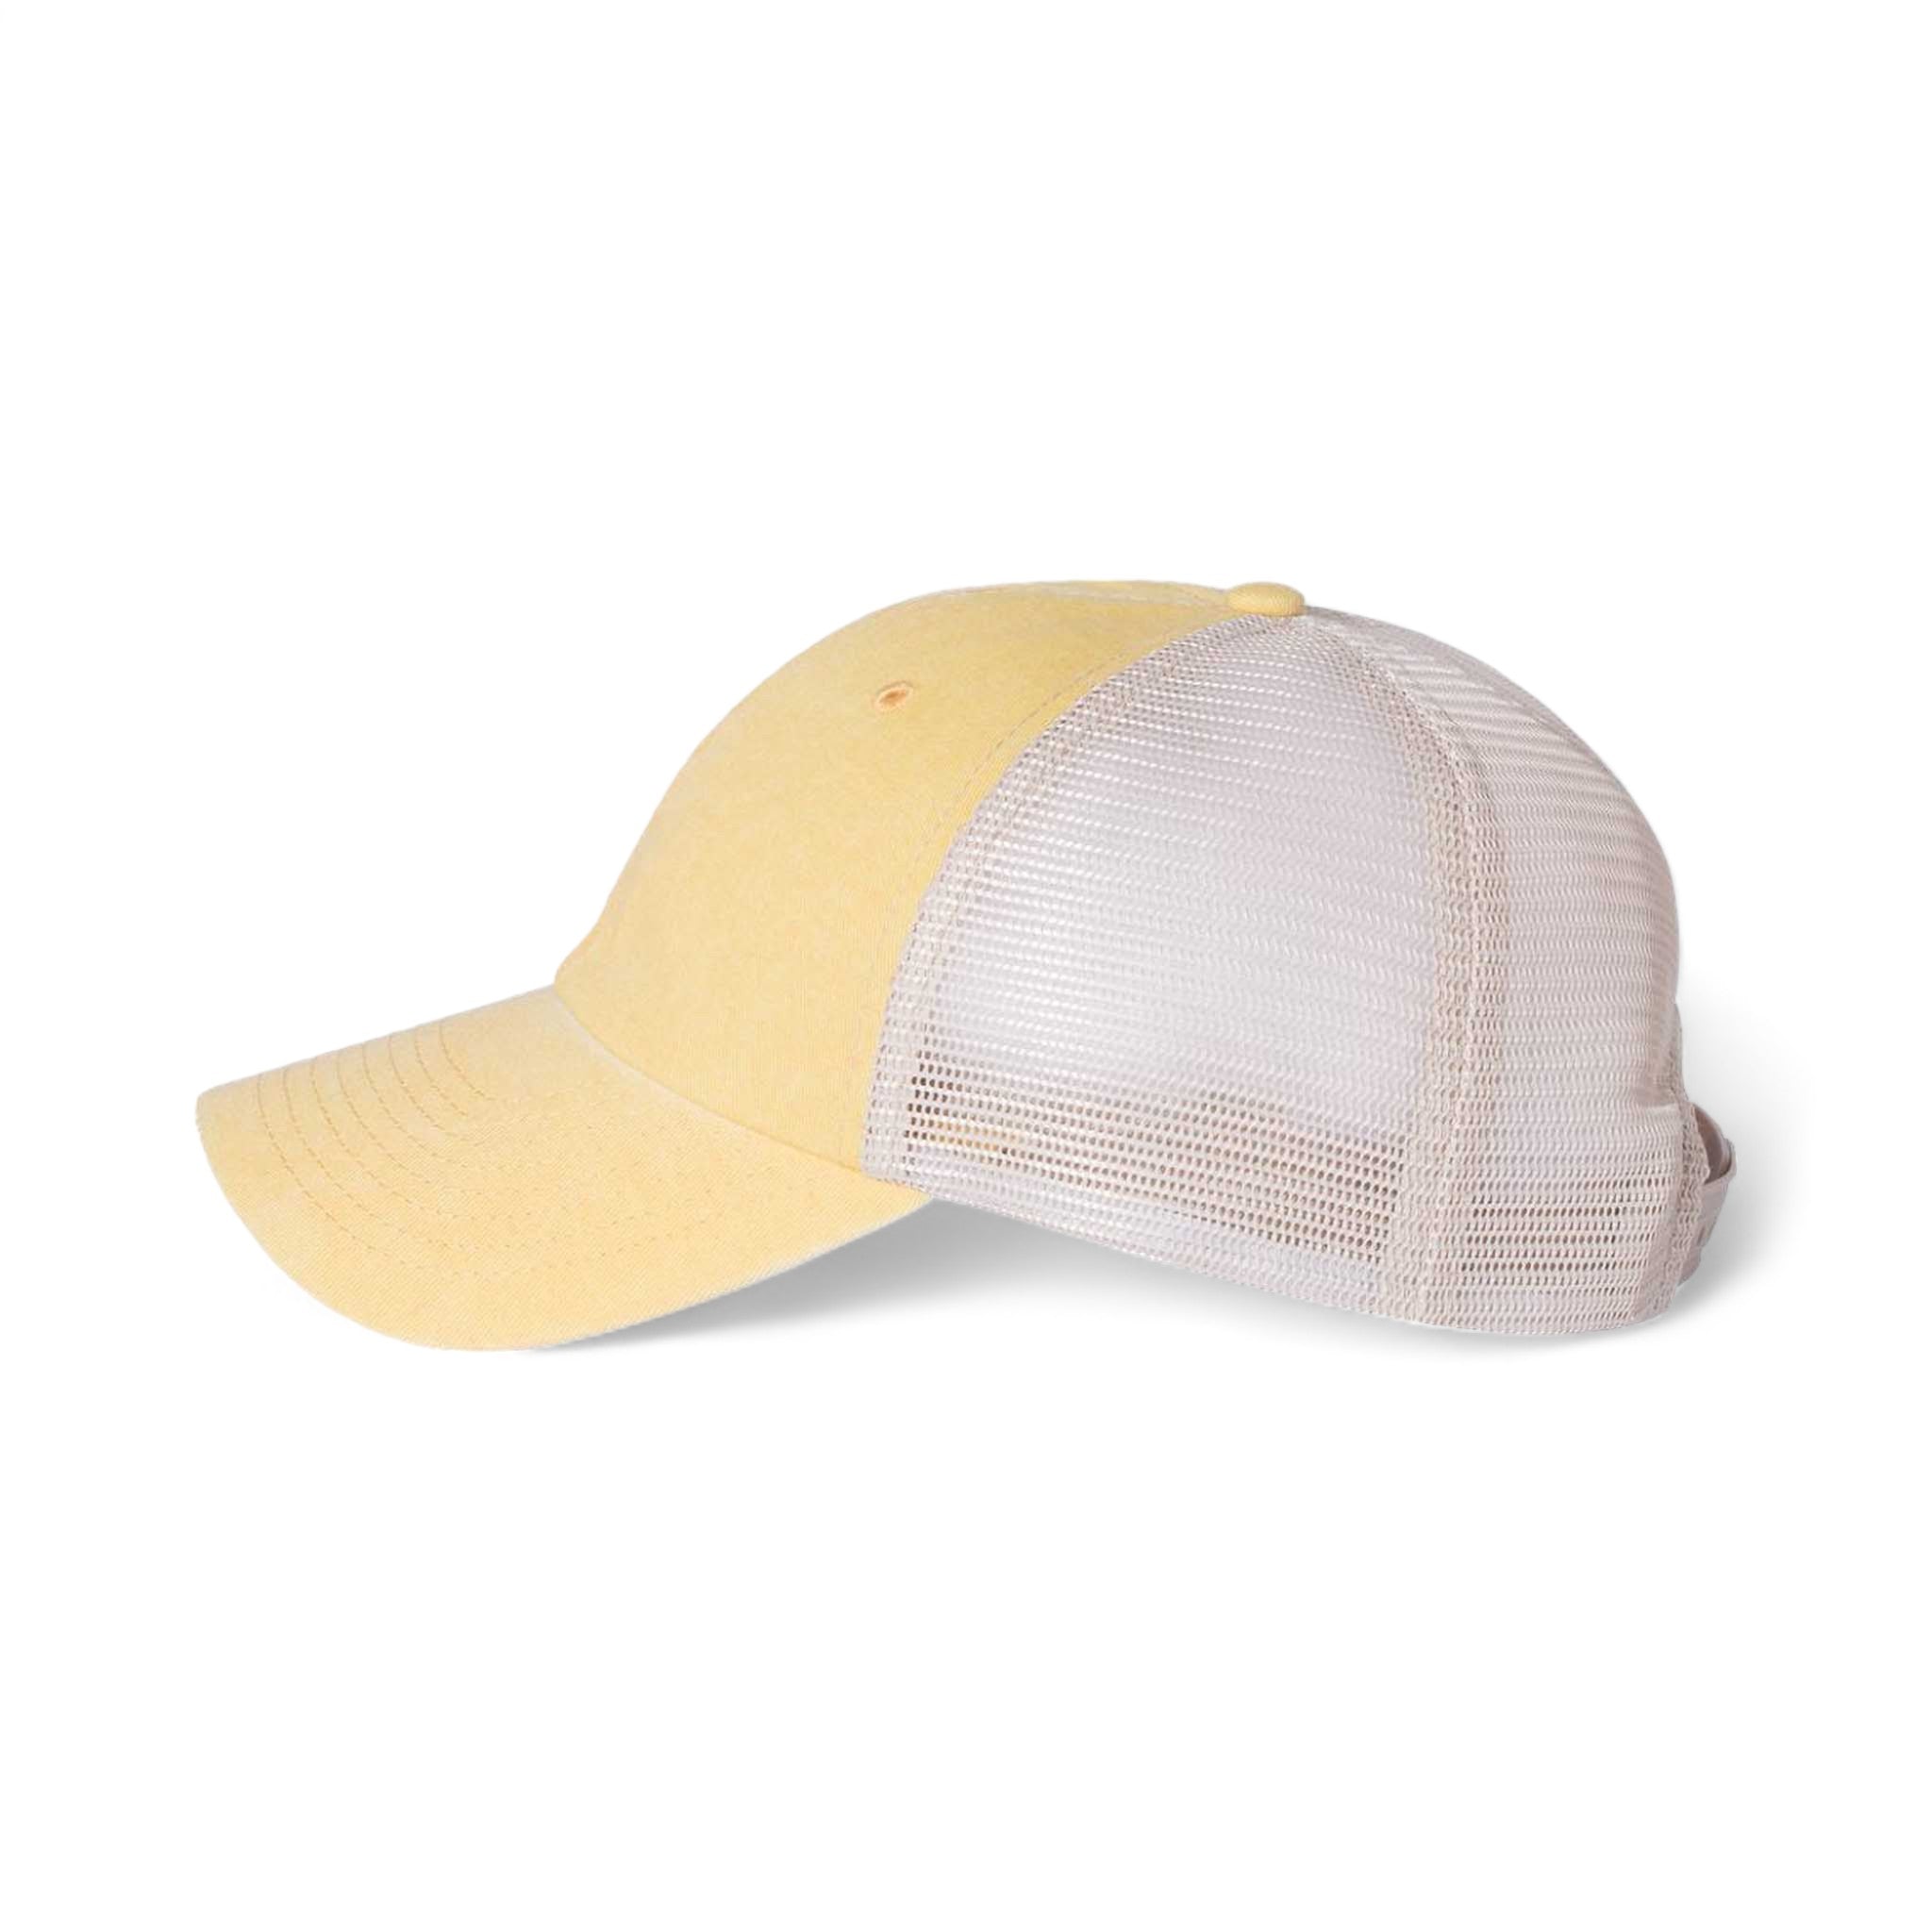 Side view of Sportsman SP510 custom hat in mustard yellow and stone